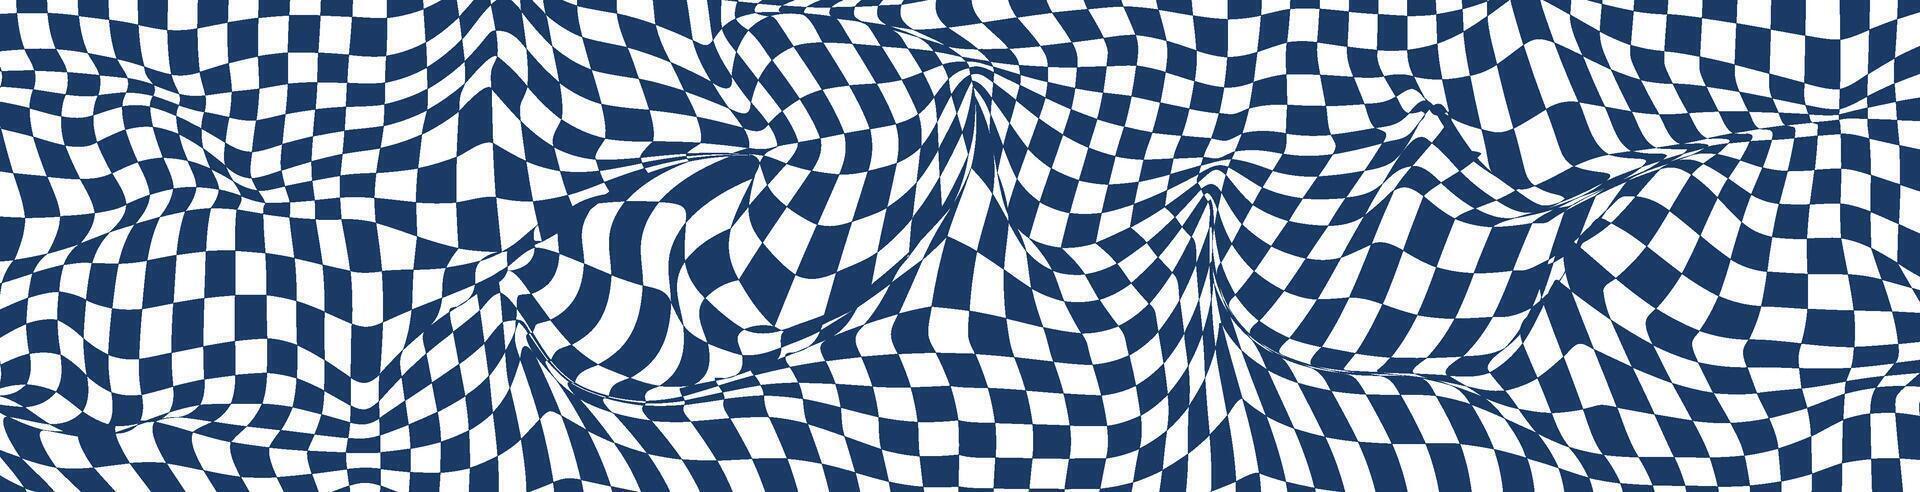 Abstract background with flowing wave lines in blue and white. dynamic pattern and fluid aesthetic. Flat vector illustration isolated on white background.